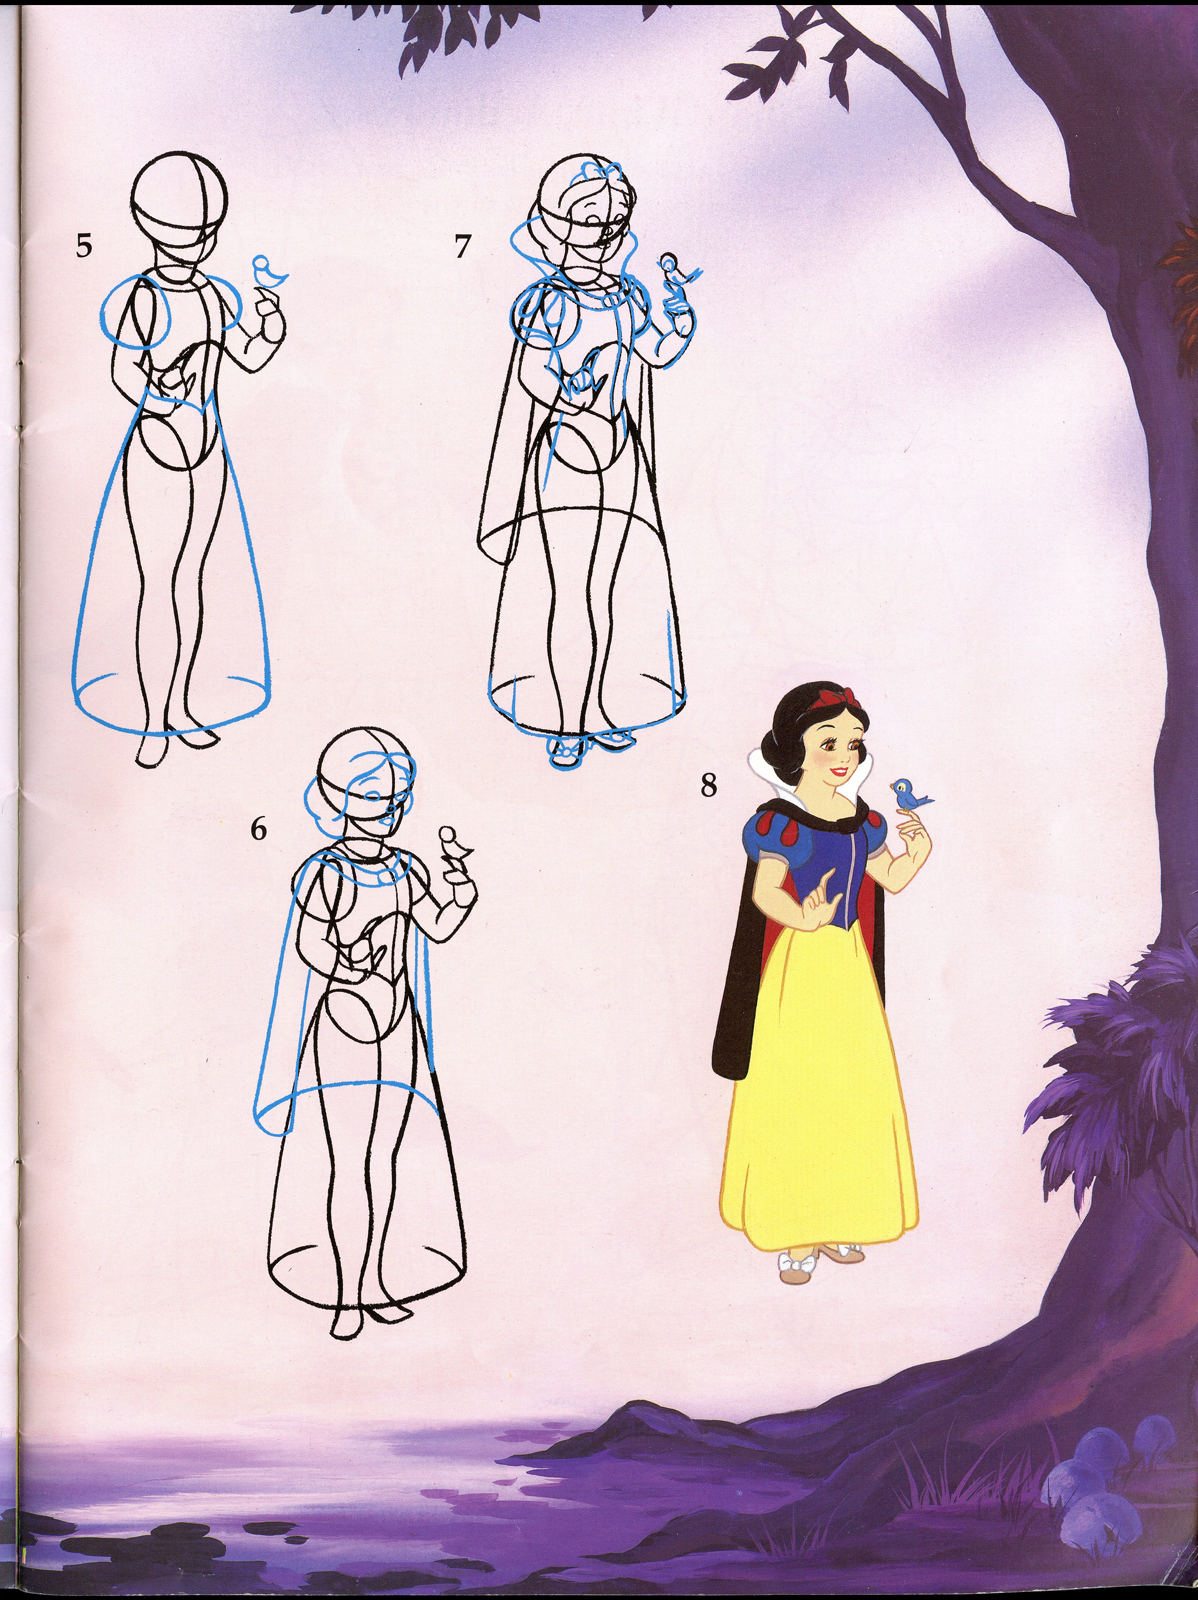 Filmic Light - Snow White Archive: 'How To Draw Snow White' Book